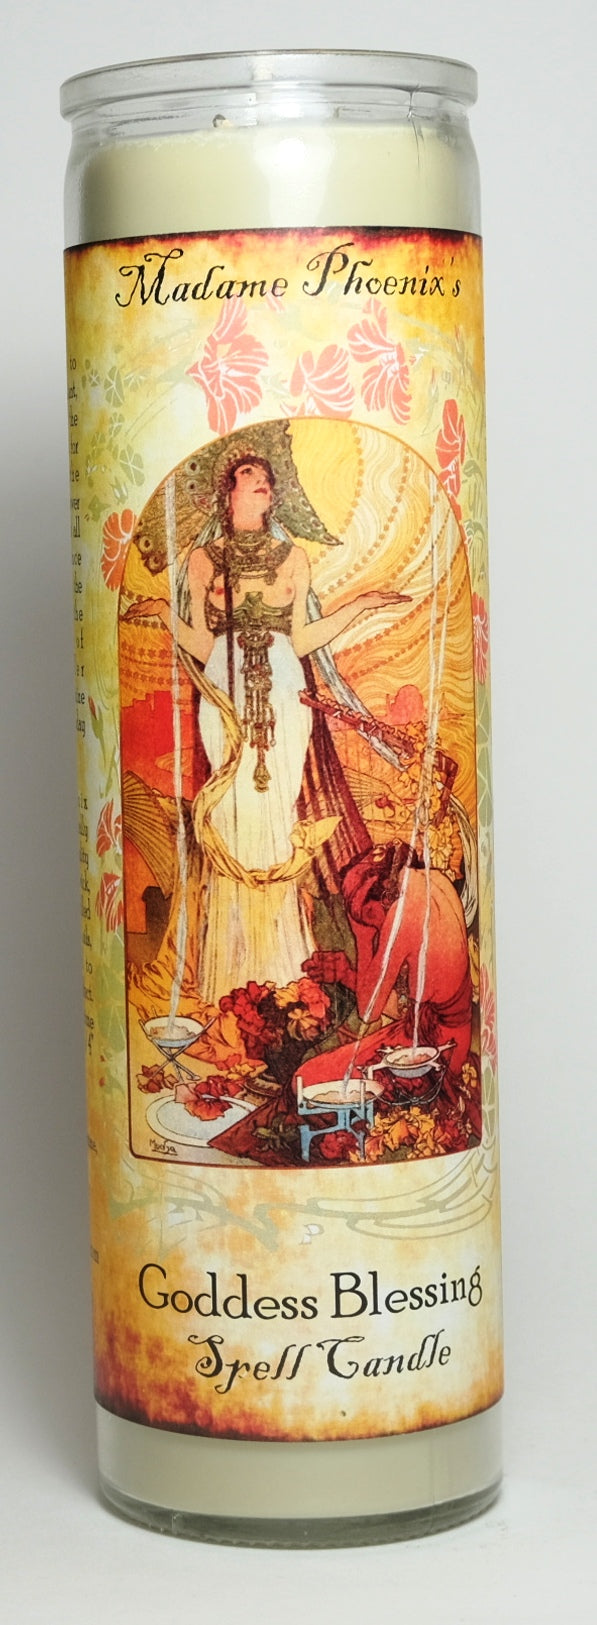 Madame Phoenix - GODDESS BLESSING Spell Candle 7 Day